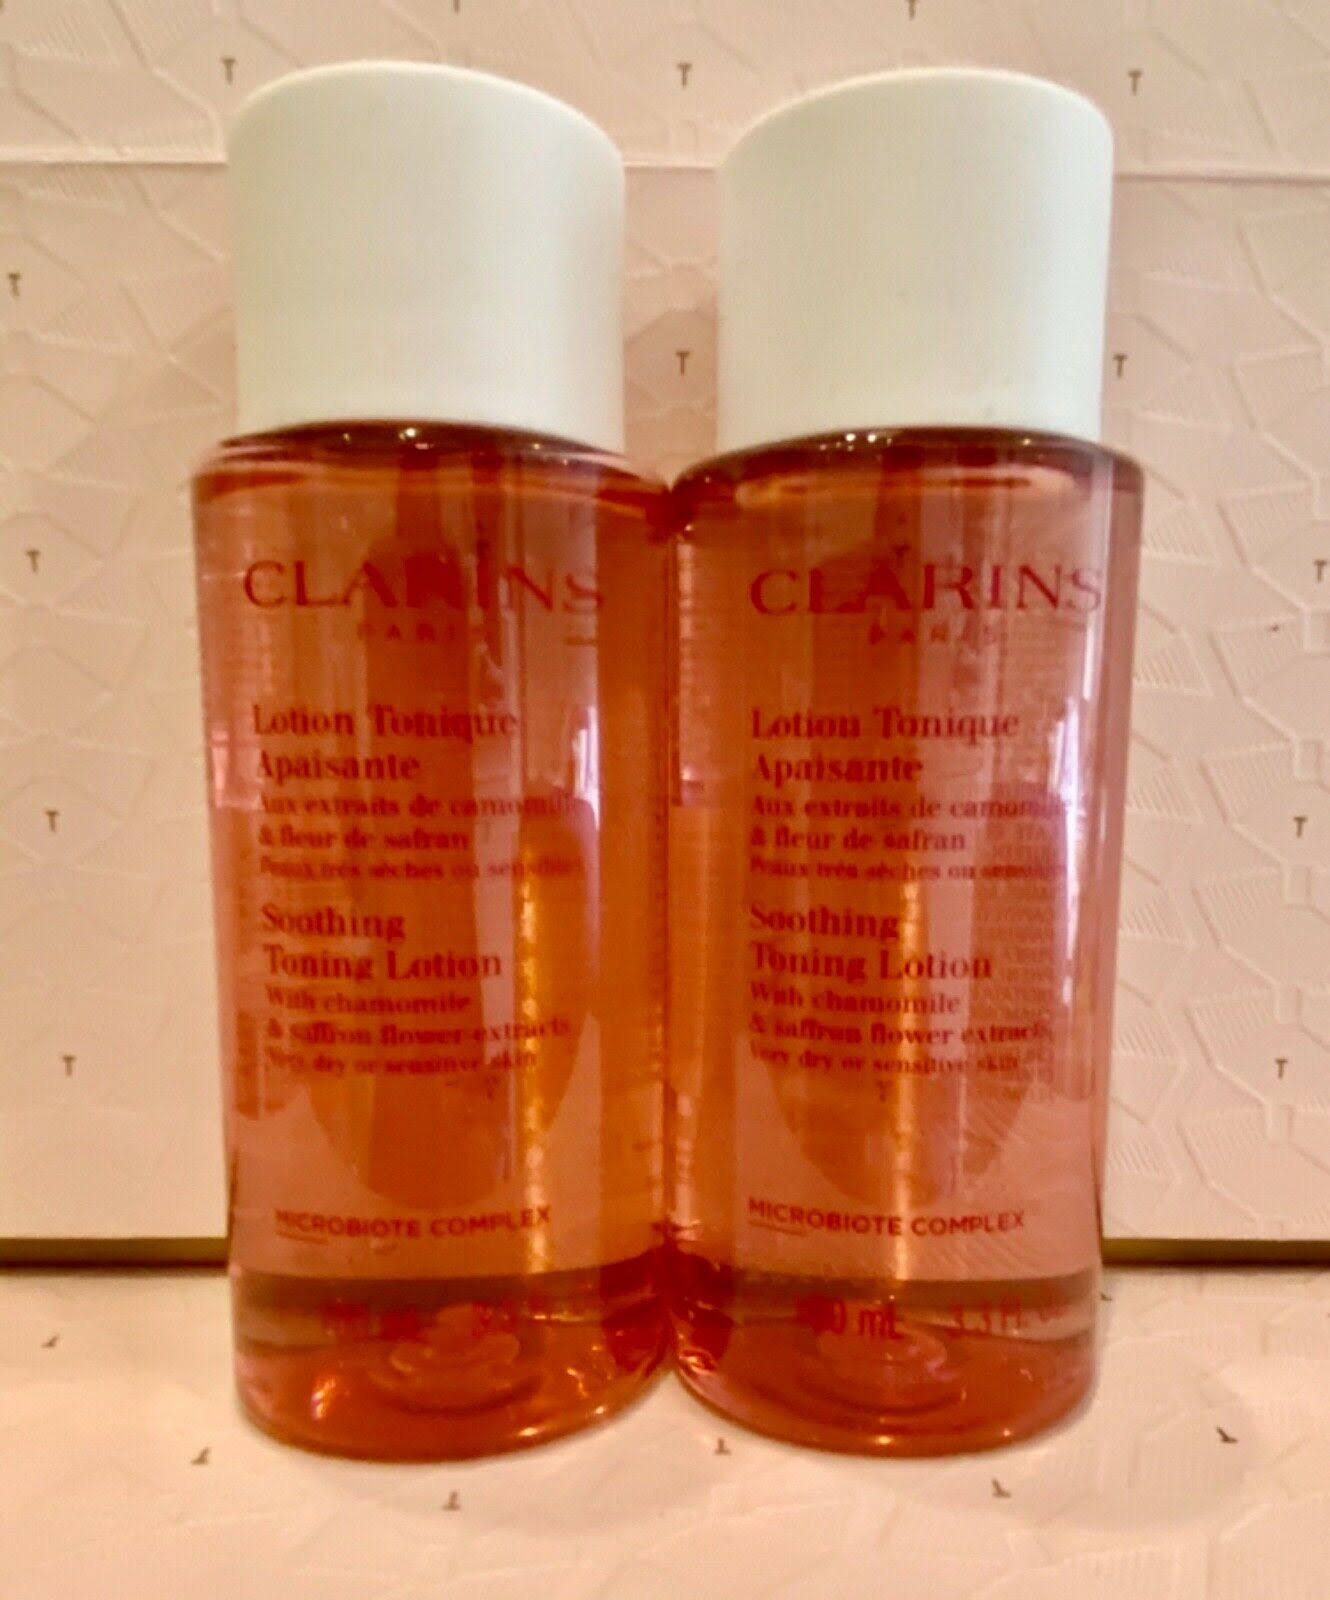 Clarins Soothing Toning Lotion 2 x 100ml Very Dry or Sensitive Skin -